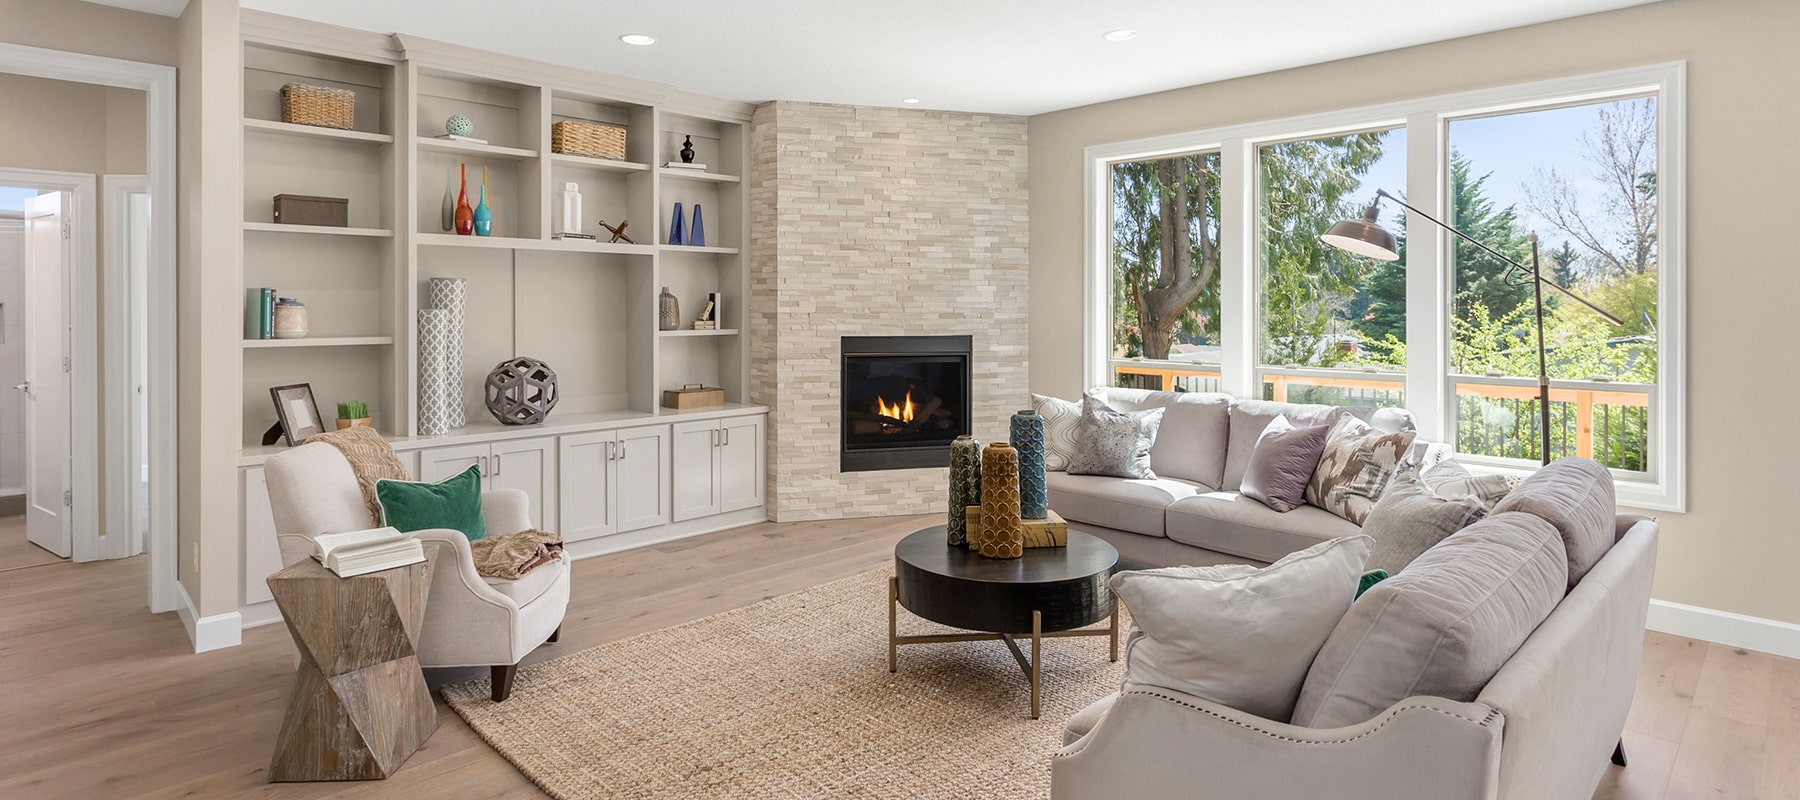 Living room with fireplace and built-in shelves